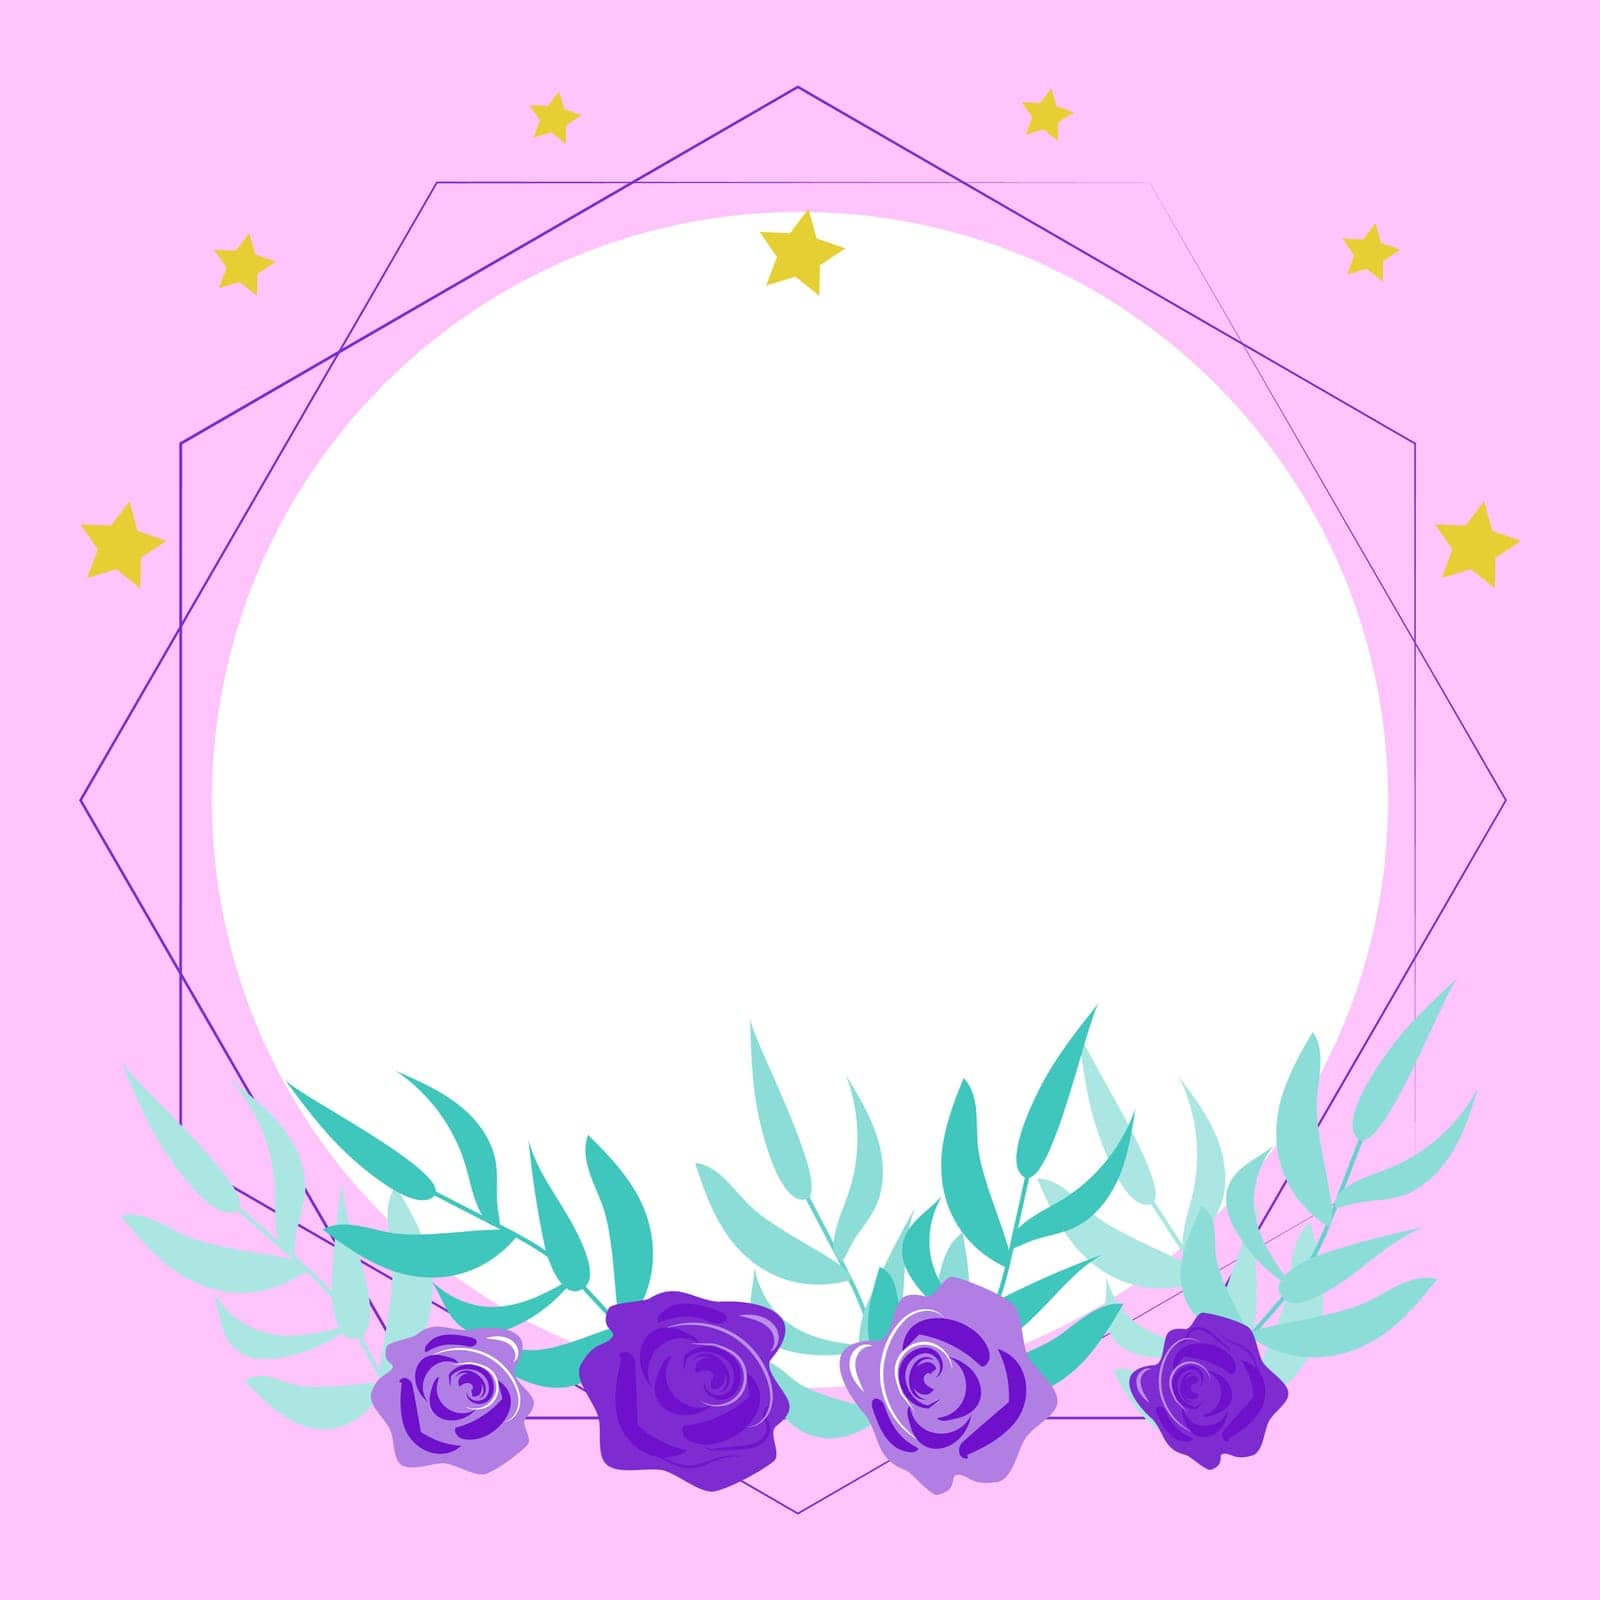 Blank purple Frame Decorated With Colorful Flowers And Foliage